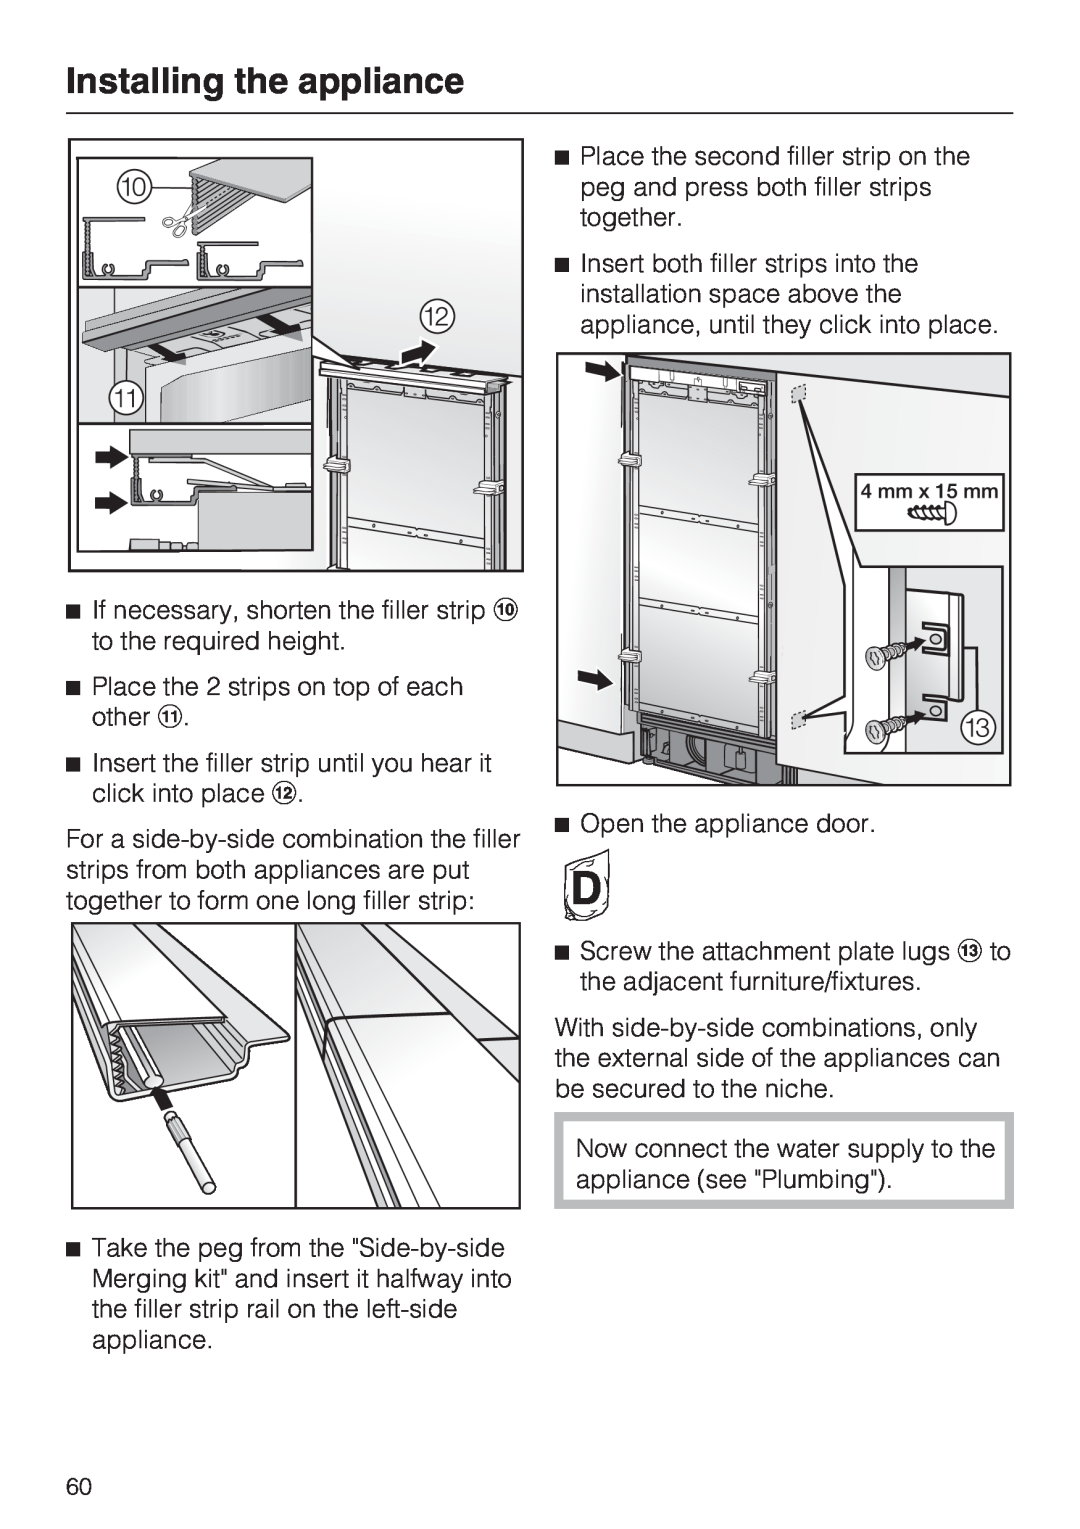 Miele F1411VI installation instructions Installing the appliance, Open the appliance door 